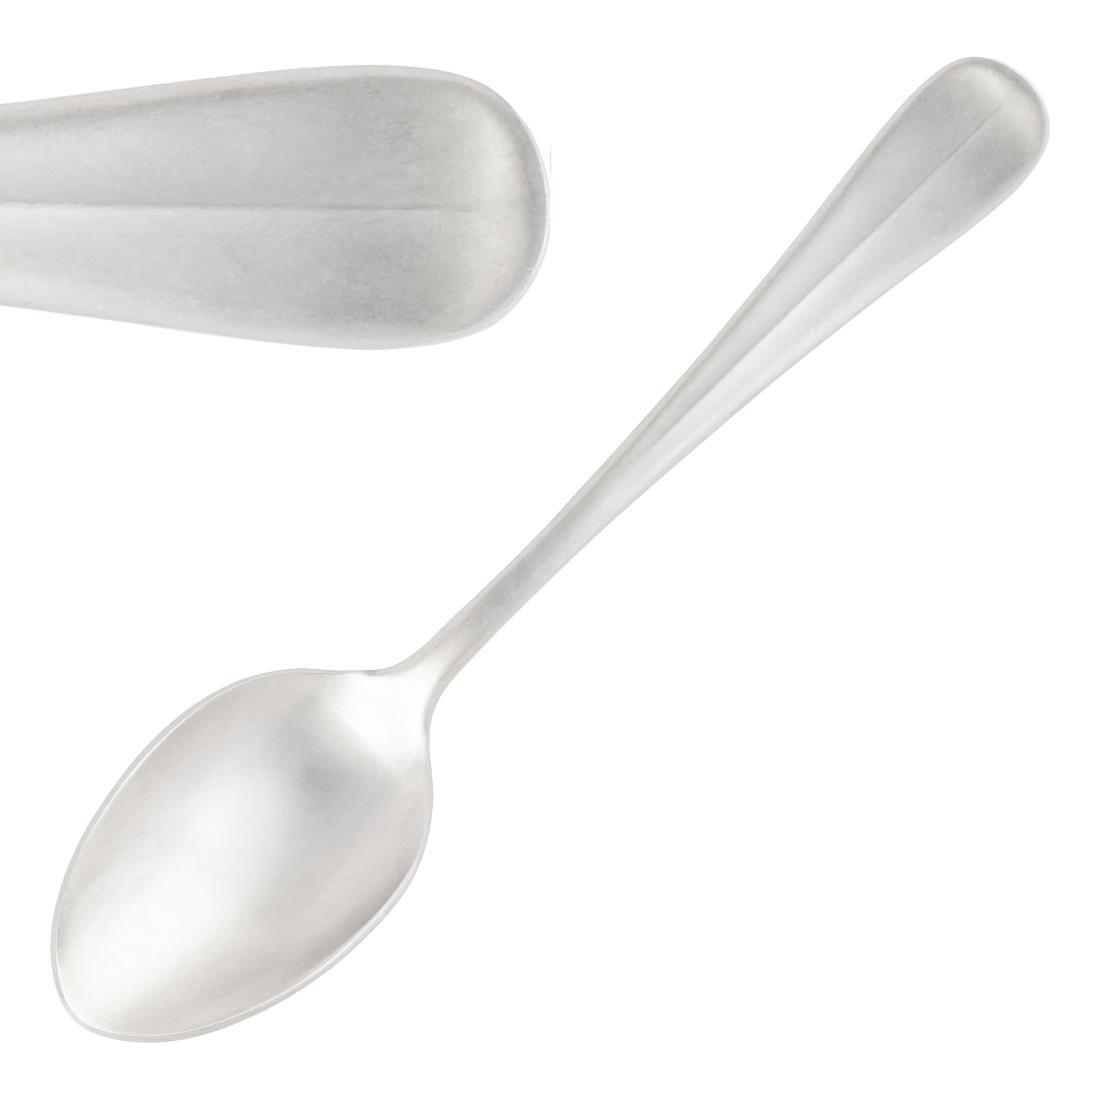 Pintinox Baguette Stonewashed Tablespoon (Pack of 12) - GN780  - 1